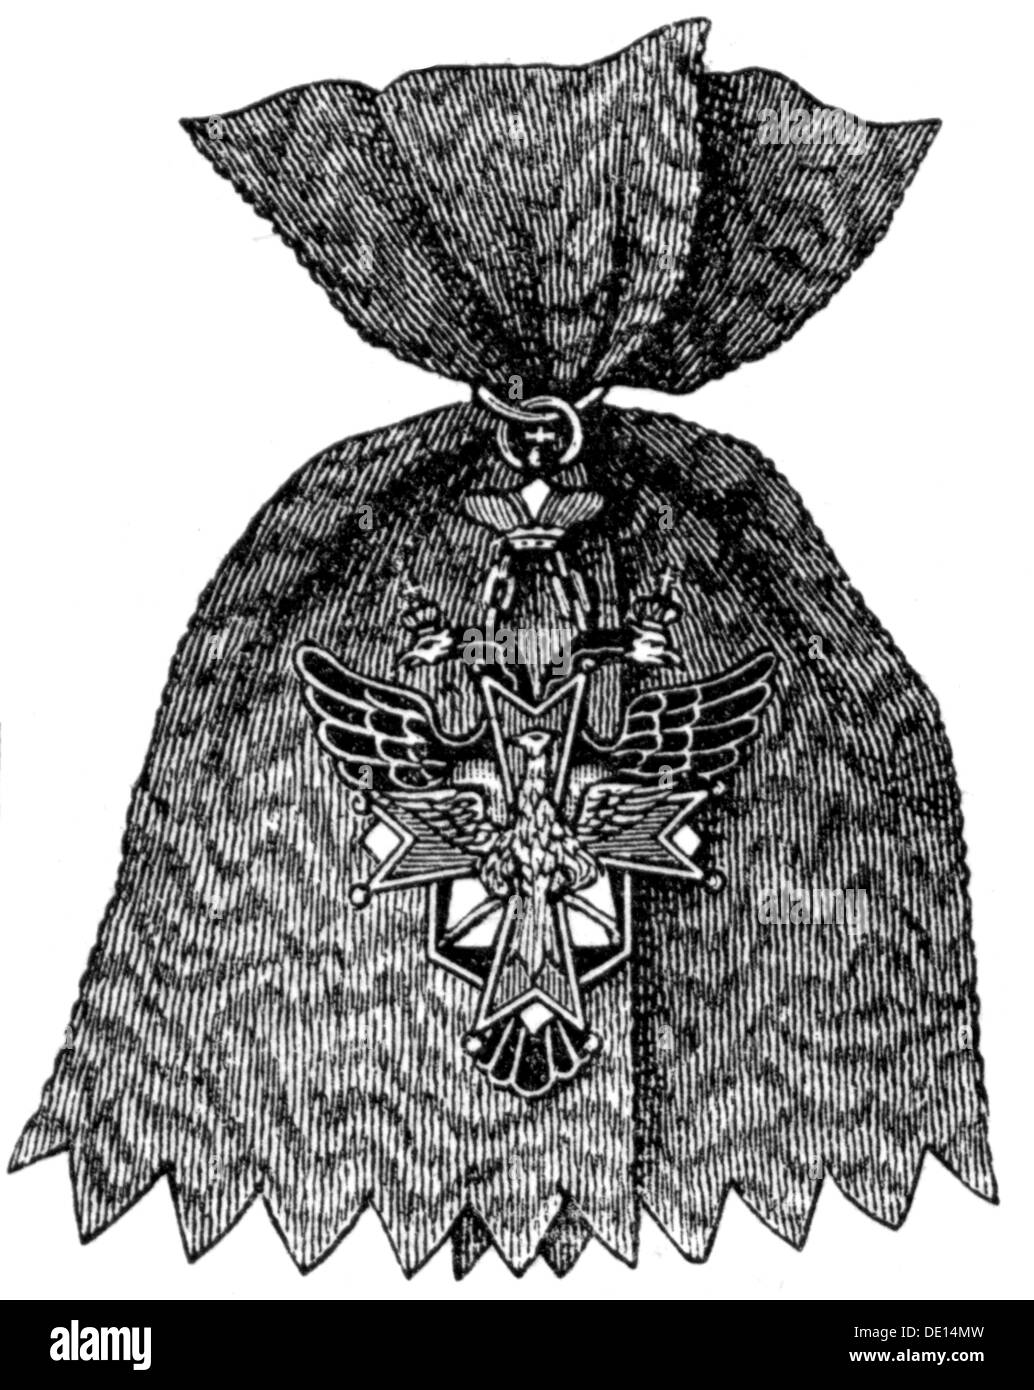 medals and decorations, Russia, Order of the White Eagle, founded 1705 by King August II of Poland, badge, wood engraving, 2nd half 19th century, cross, crosses, ribbon, ribbons, Russian empire, czardom, tsardom, eagle, eagles, historic, historical, Additional-Rights-Clearences-Not Available Stock Photo